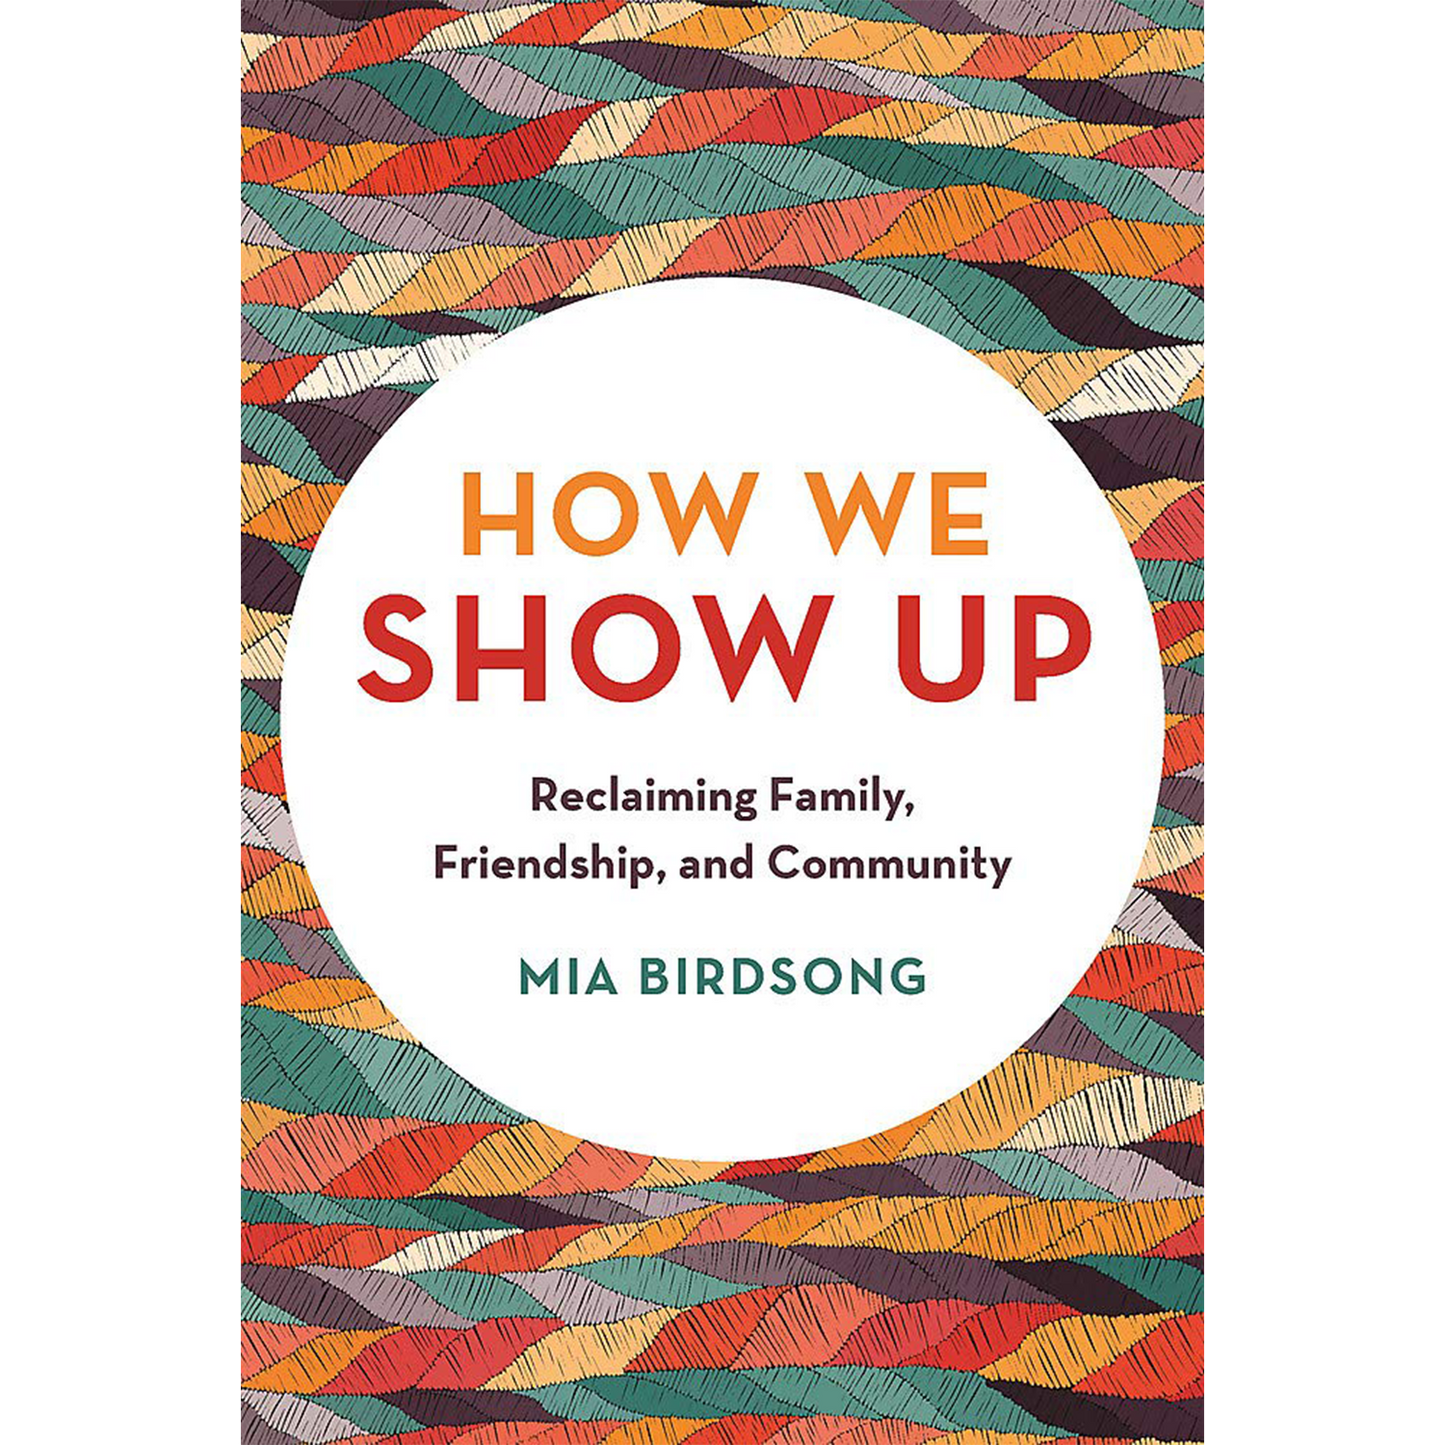 How We Show Up: Reclaiming Family, Friendship, and Community (Paperback)